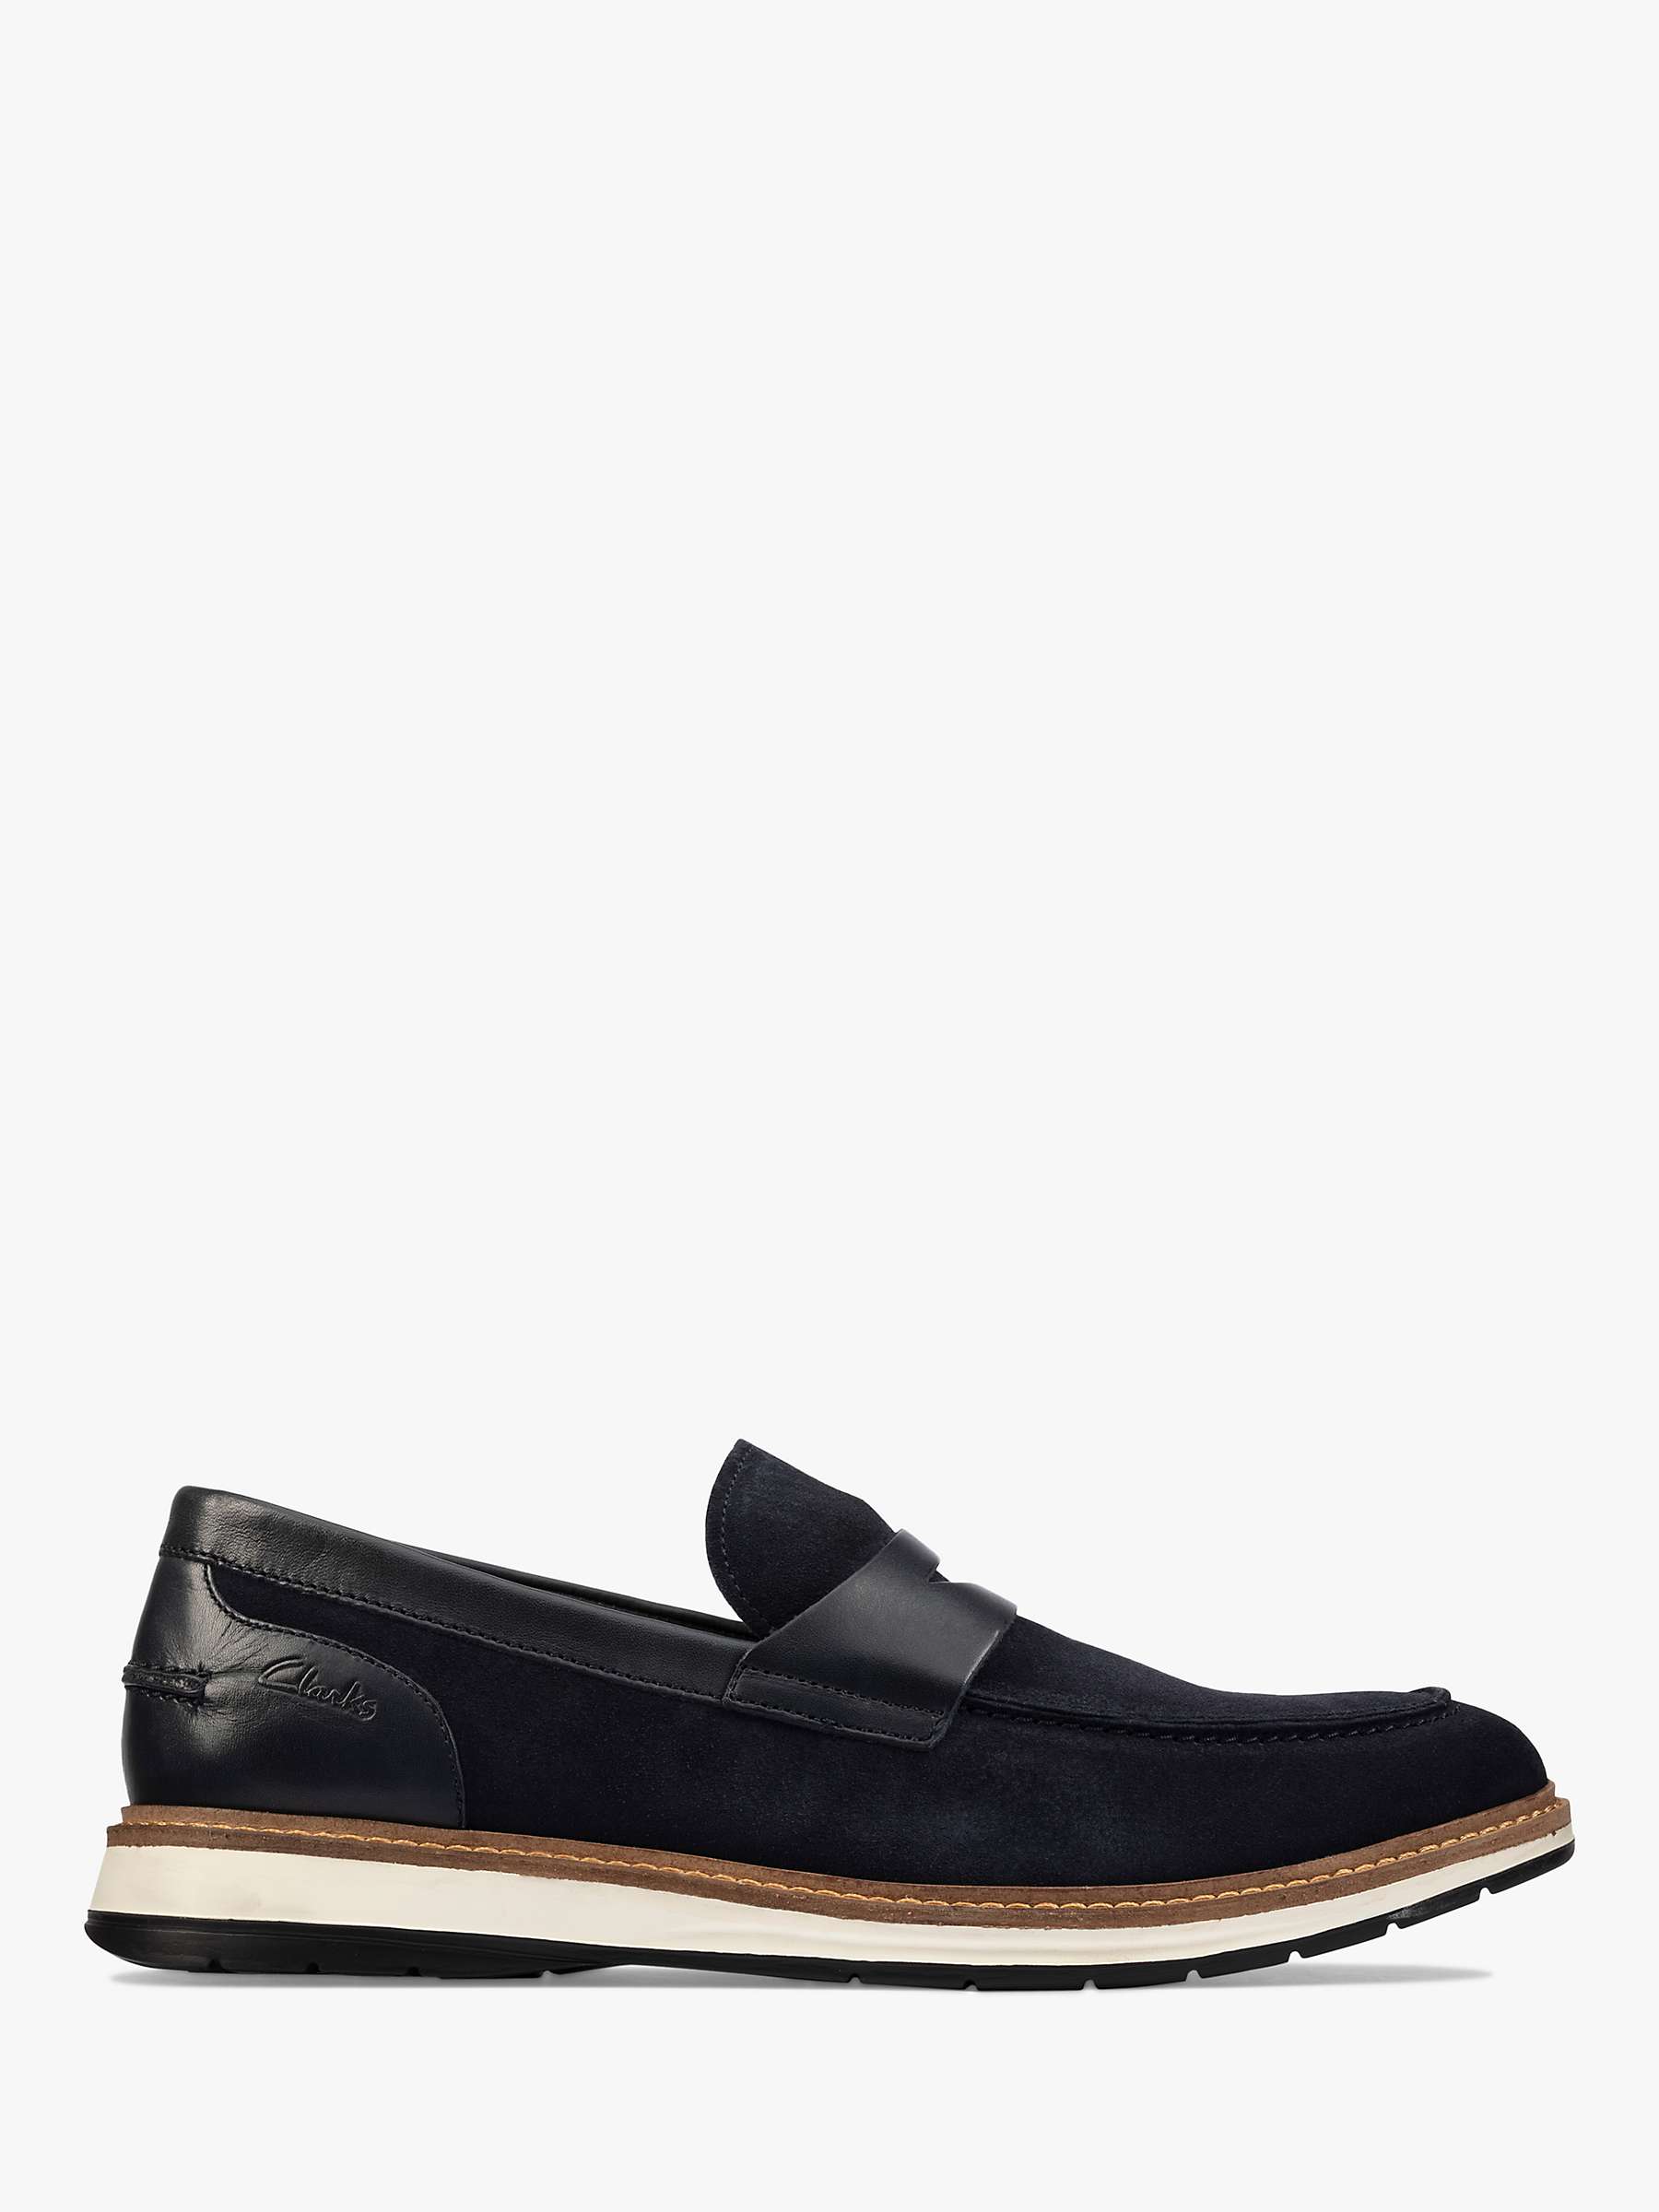 Buy Clarks Chantry Suede Penny Loafers, Navy Online at johnlewis.com